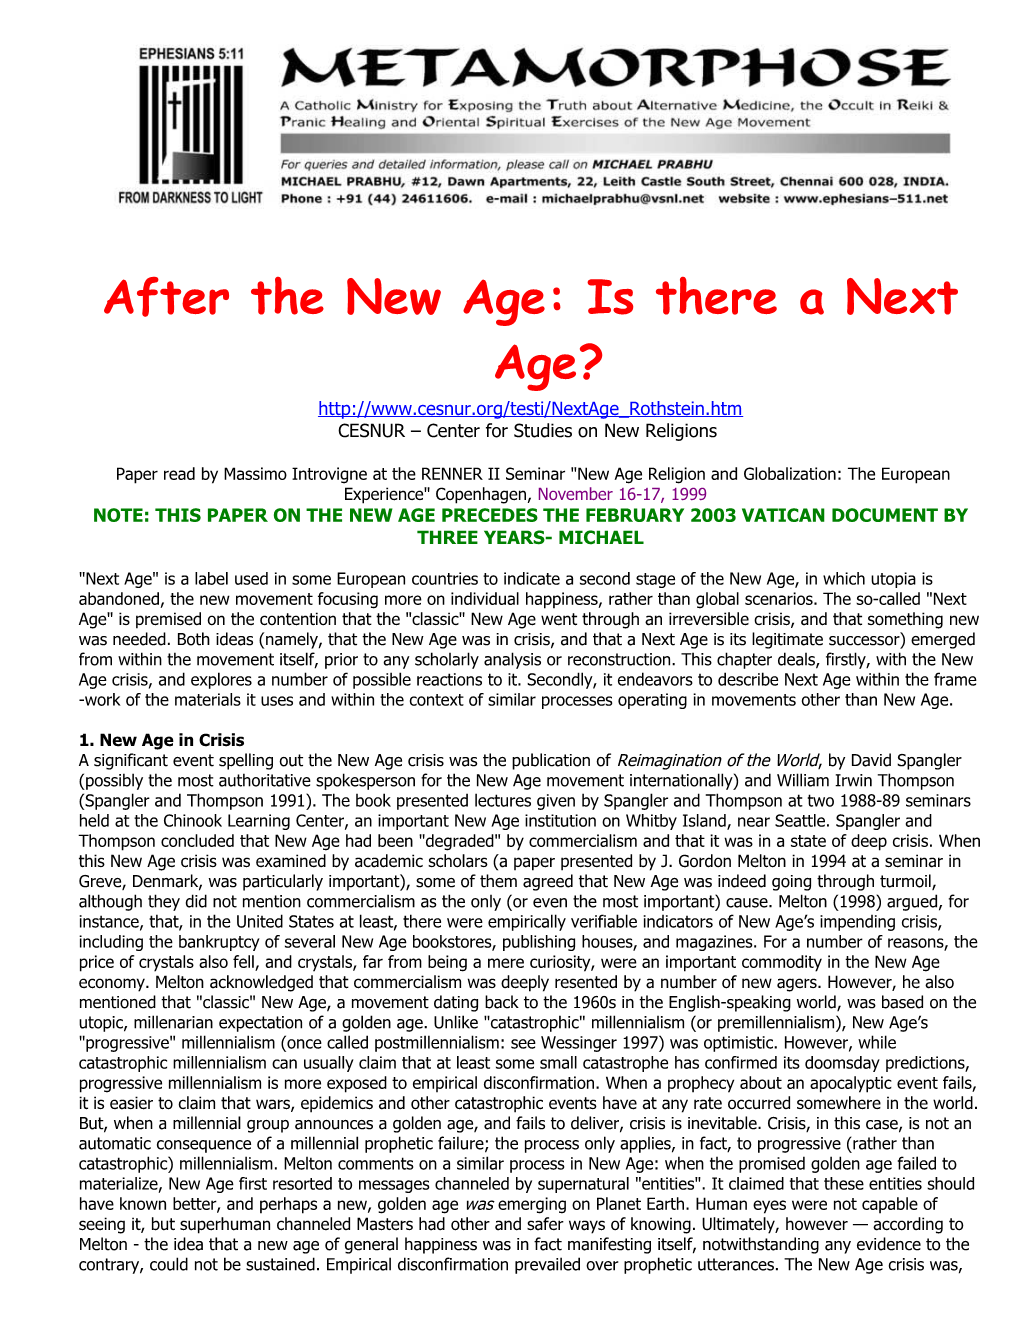 After the New Age: Is There a Next Age?